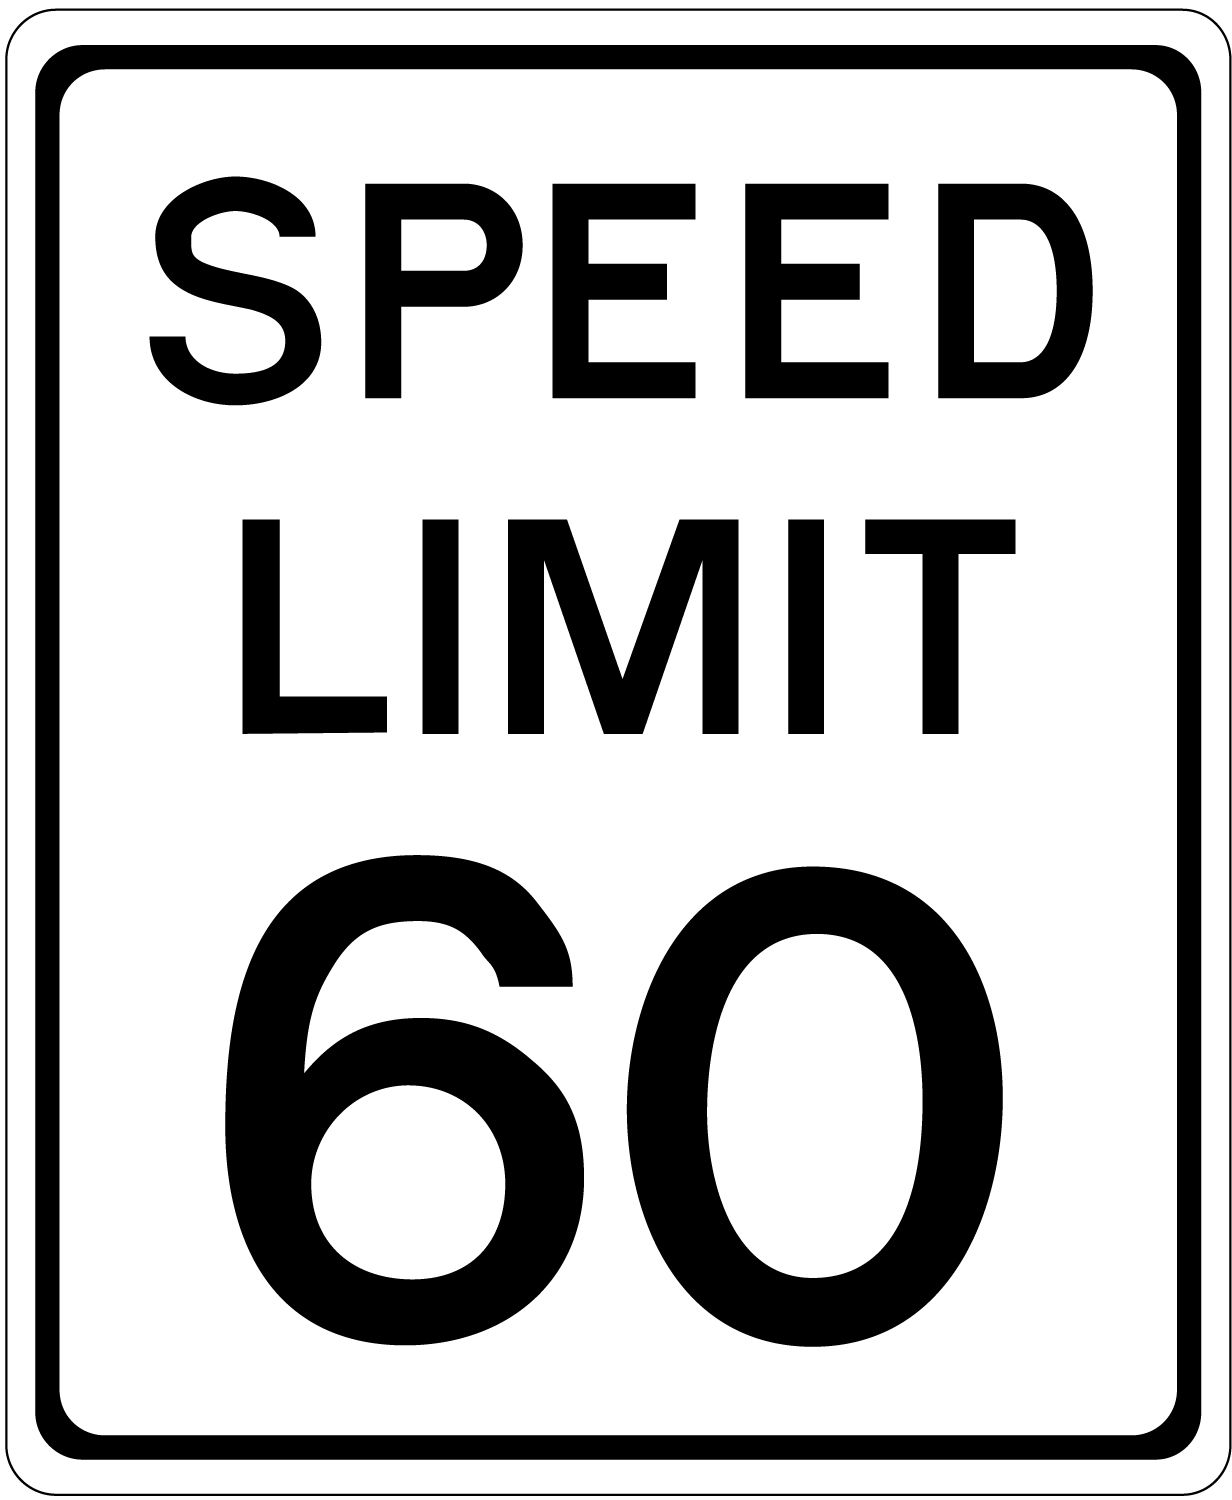 The maximum speed limit in Texas is 60mph on highways unless otherwise posted.